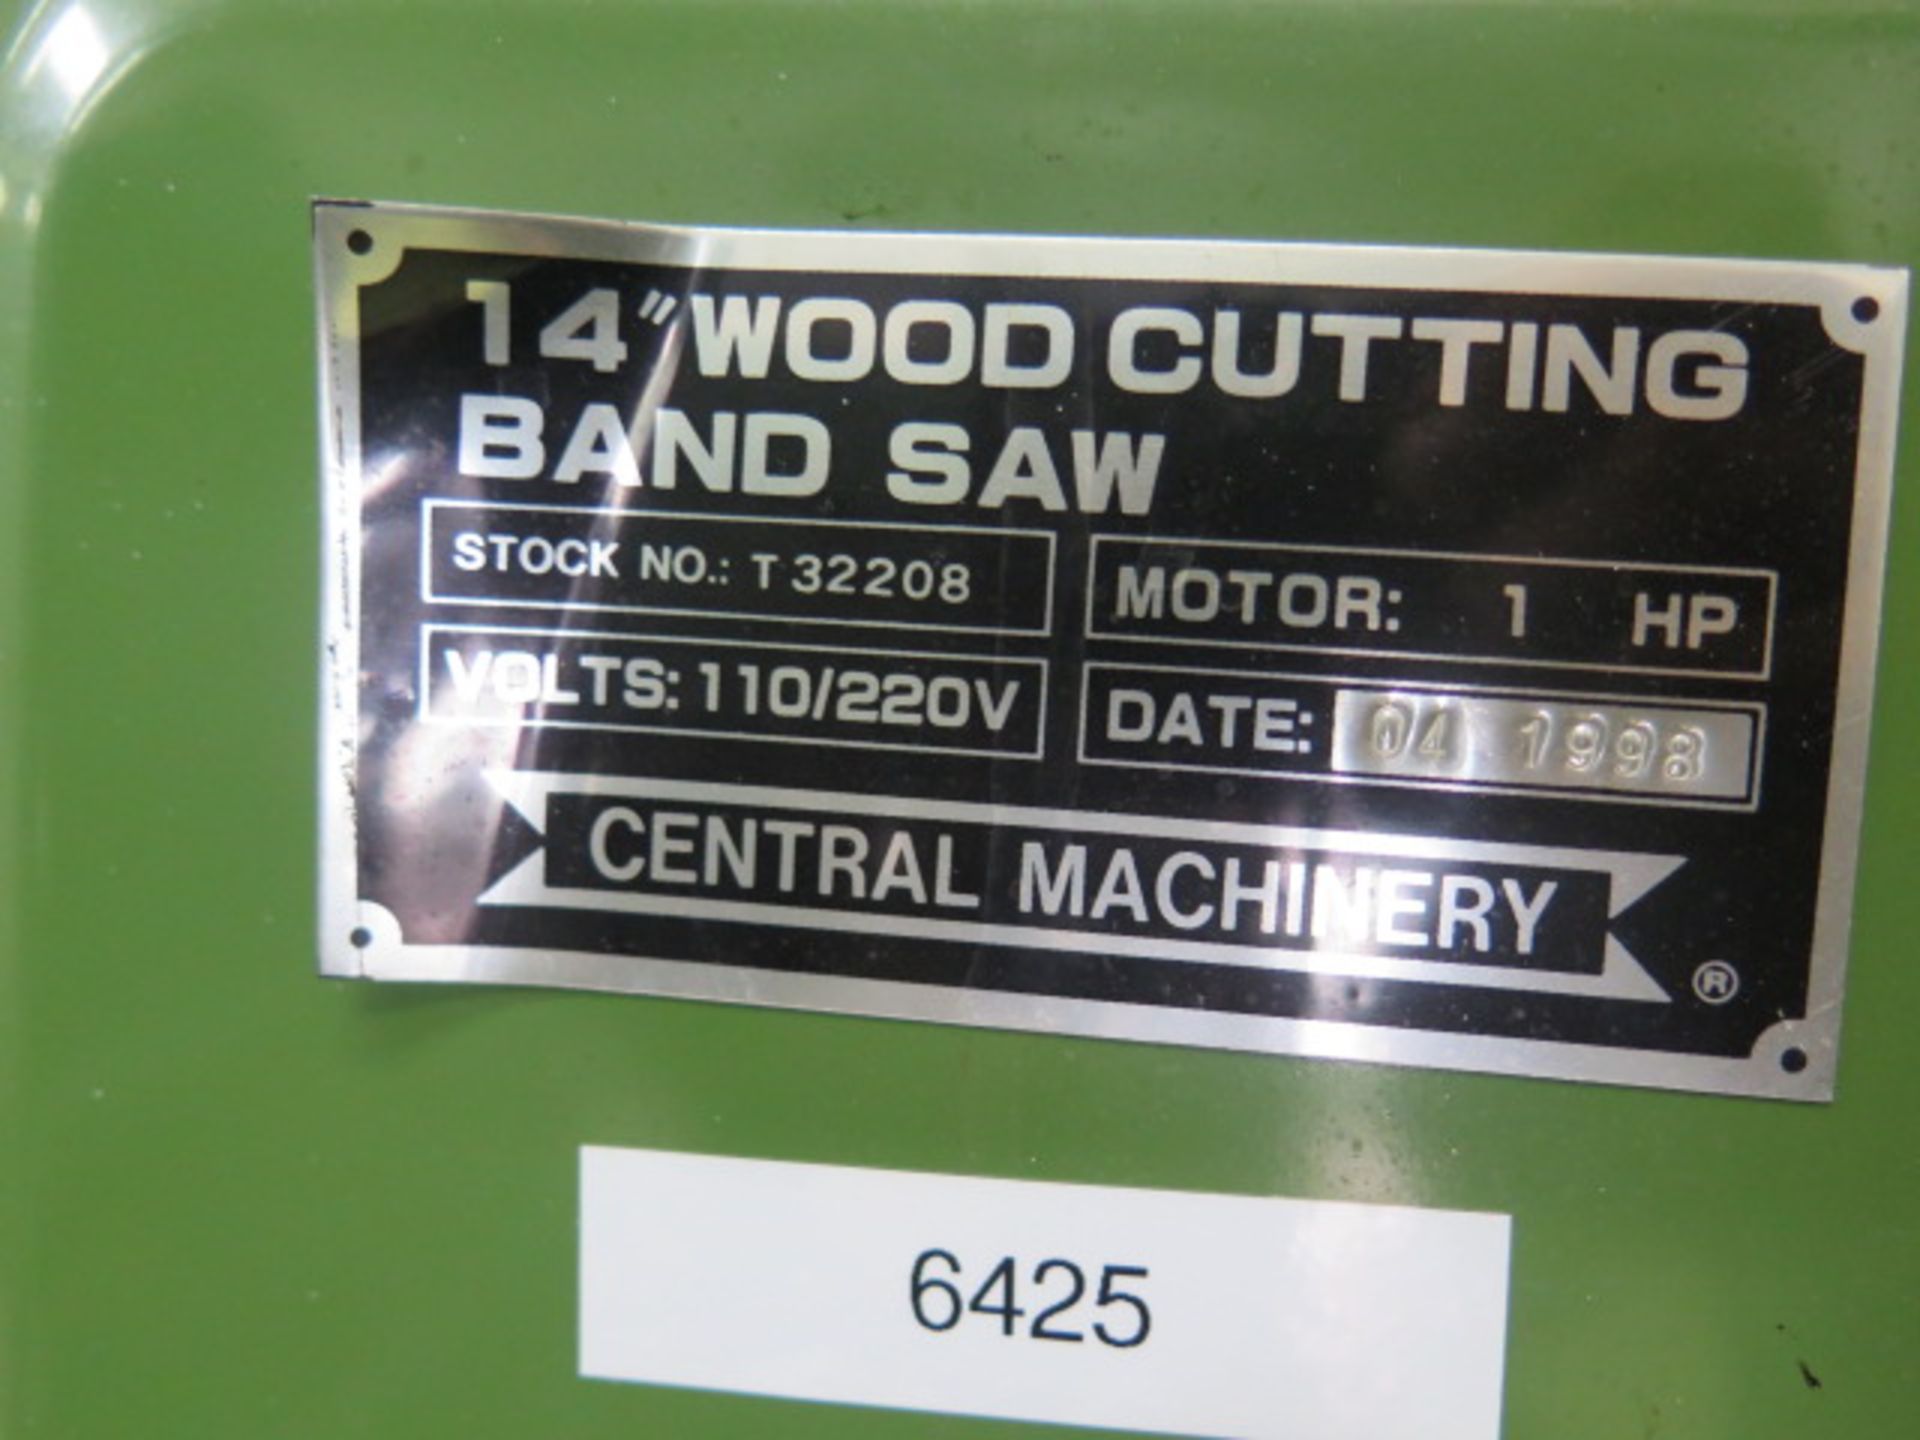 Central Machinery 14" Wood Cutting Vertical Band Saw w/ Stand (SOLD AS-IS - NO WARRANTY) - Image 5 of 5